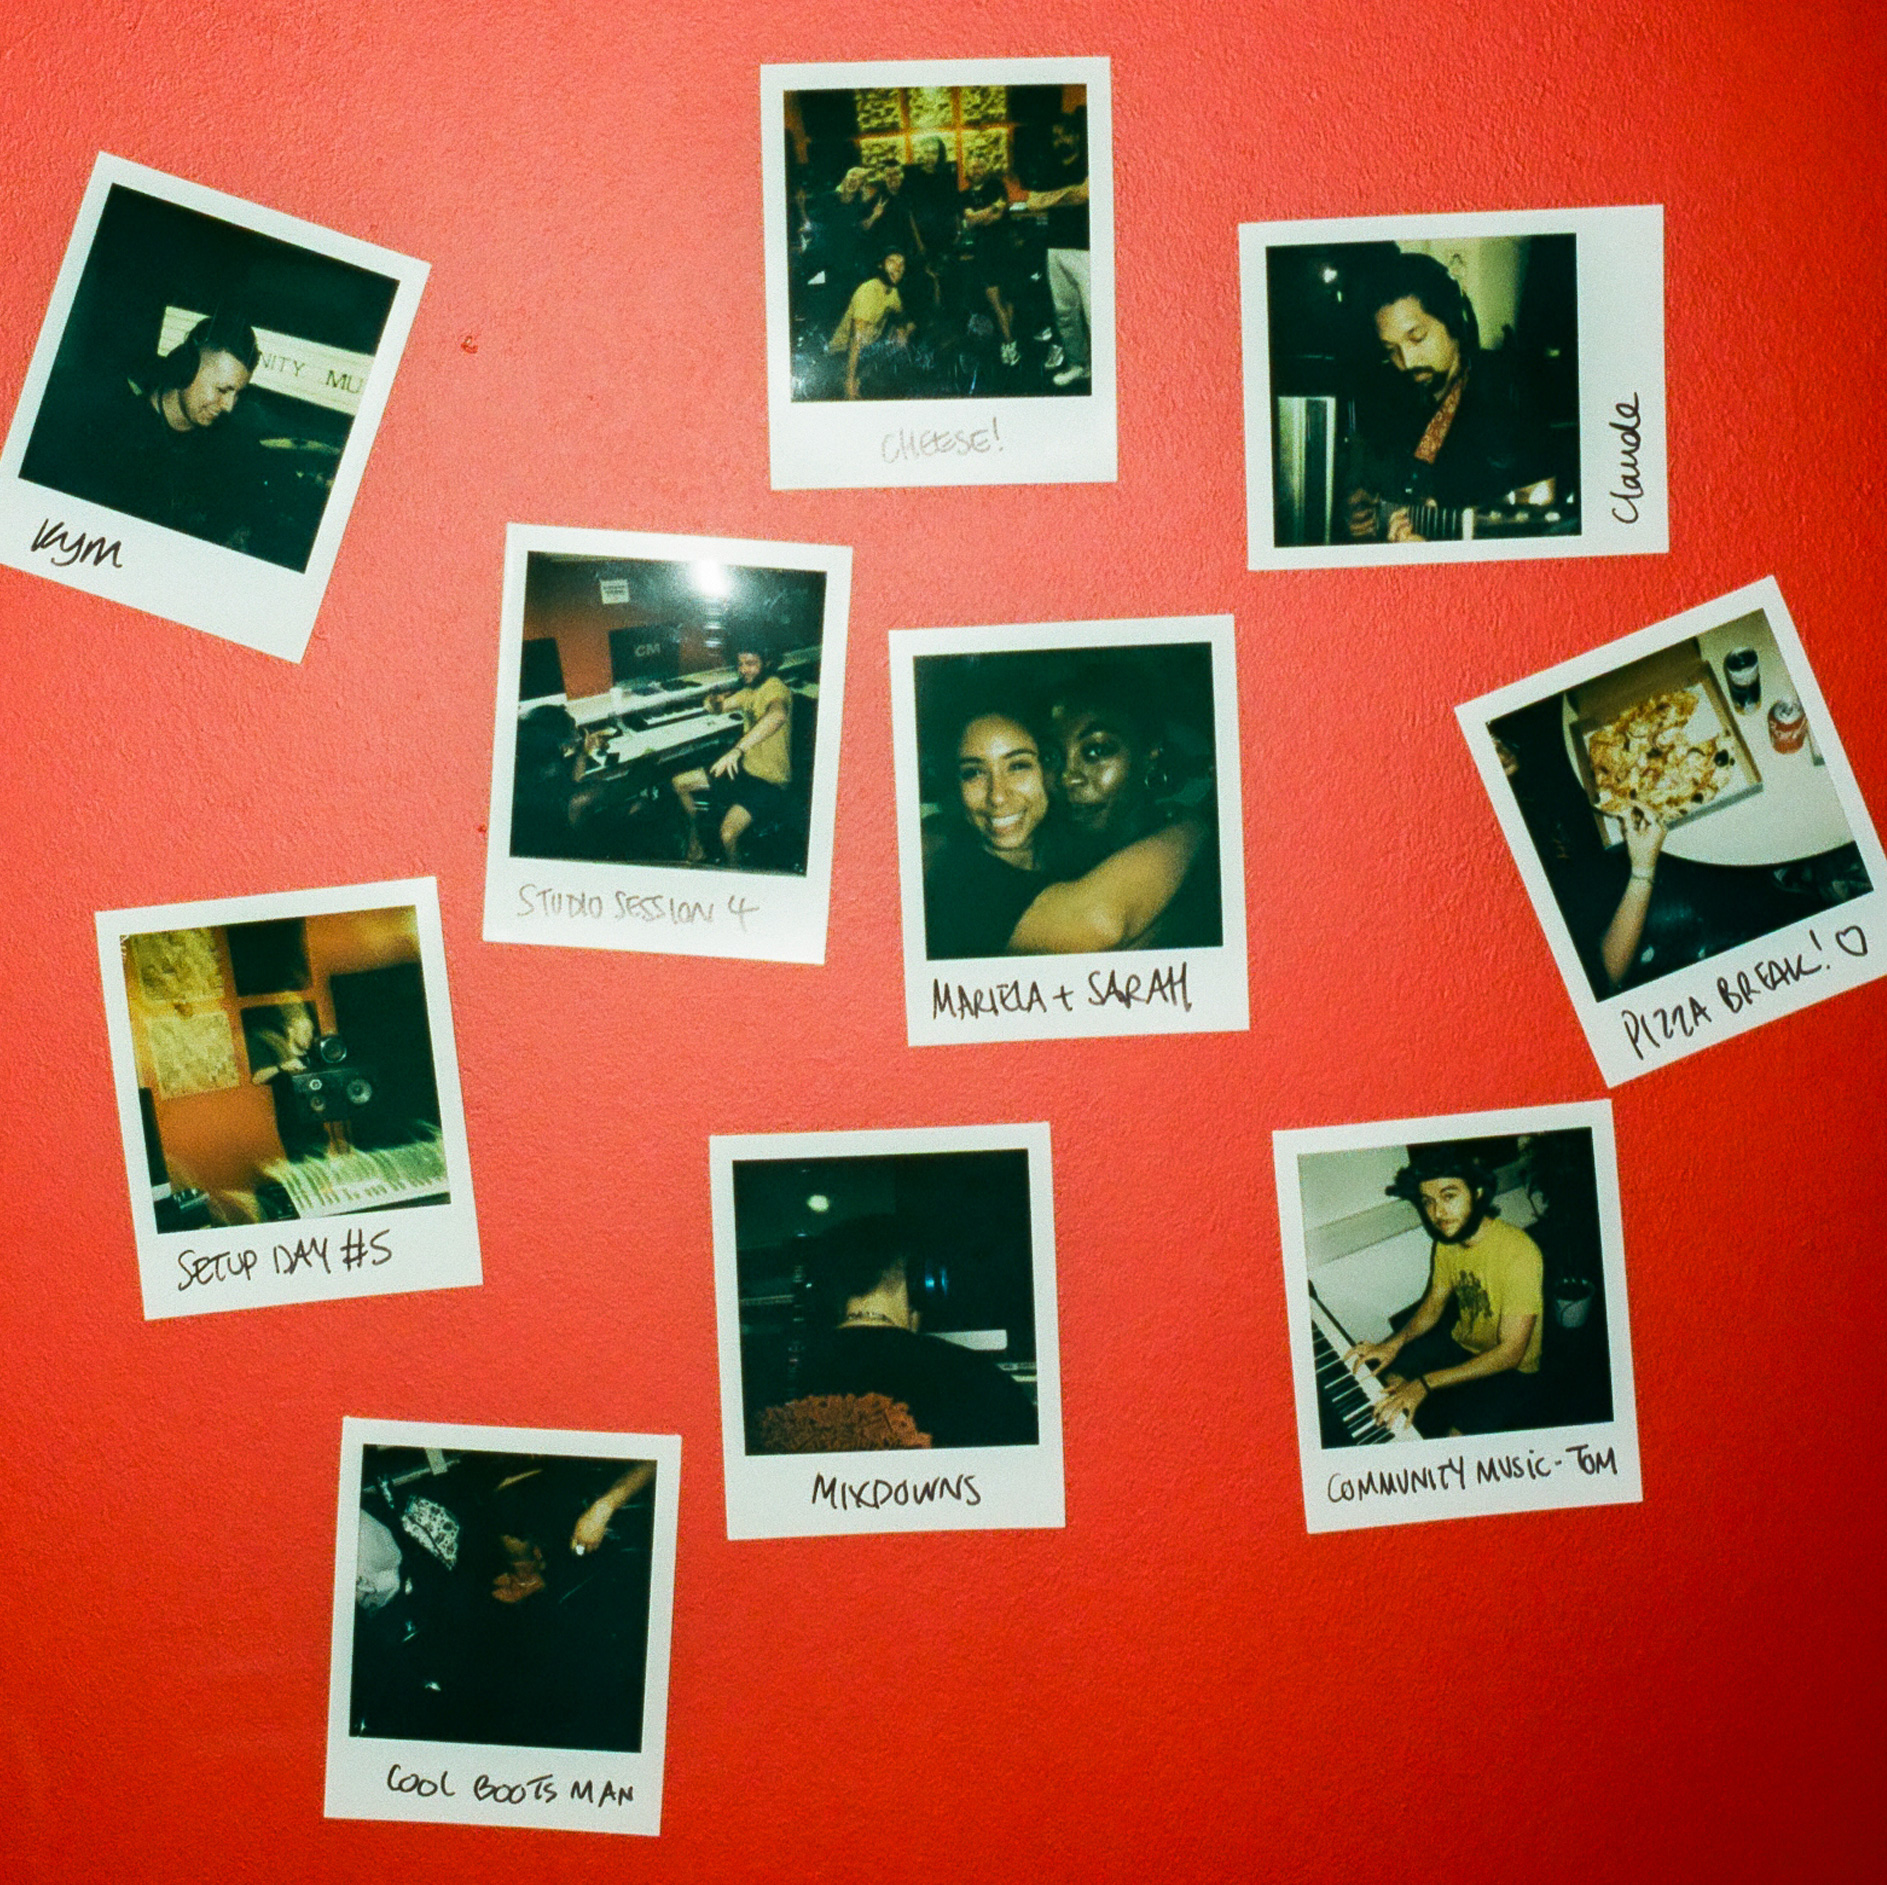 A selection of polaroid pictures of students in the studio stuck on a red wall.